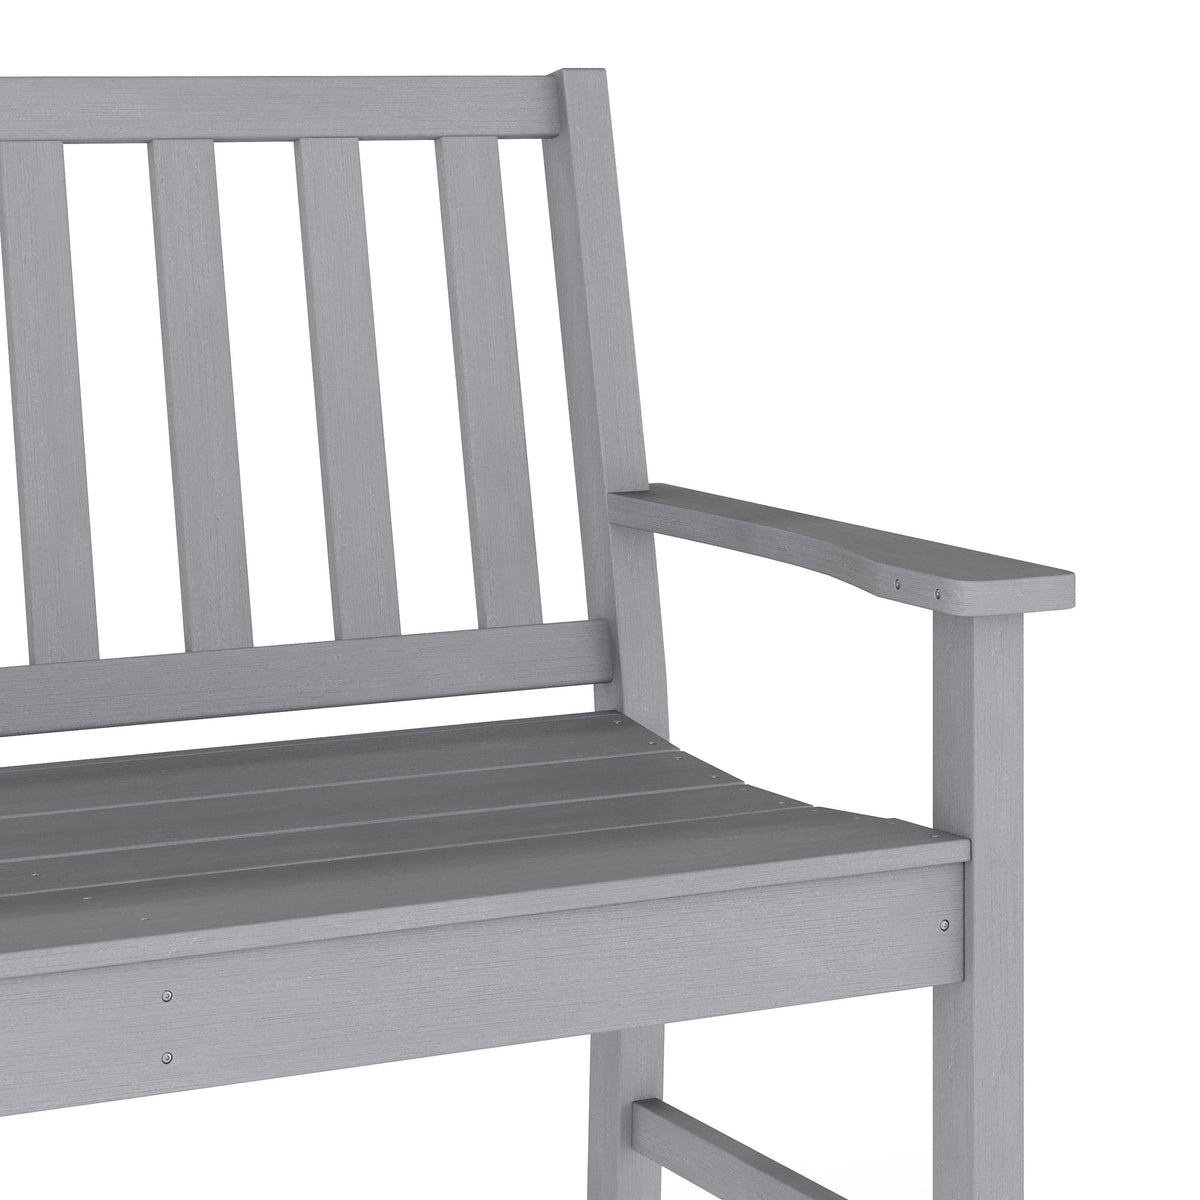 Gray |#| All Weather Heavy Duty Commercial Recycled HDPE Bench with Curved Seat in Gray